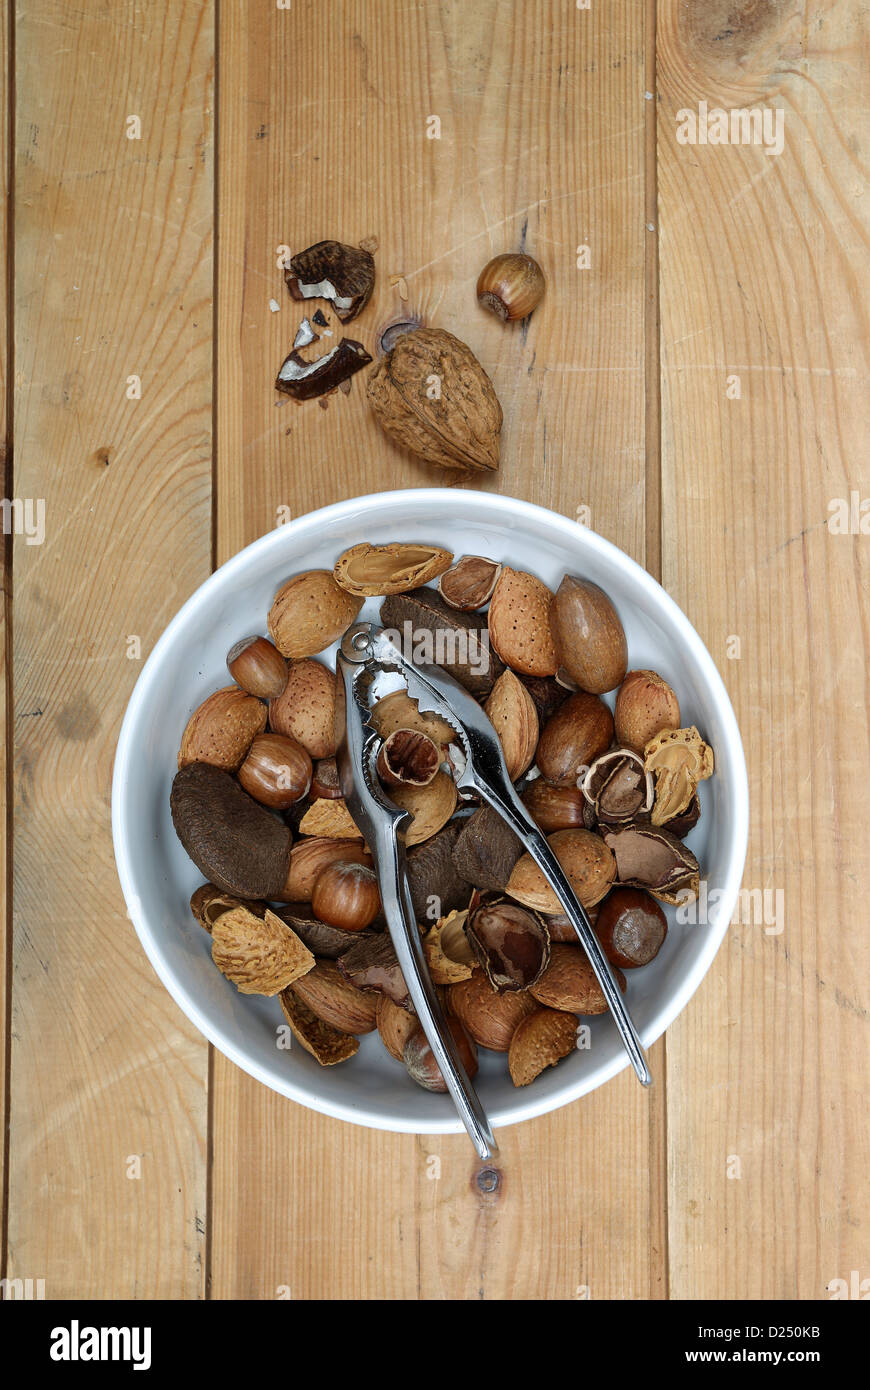 mixed nuts in a white bowl with a metal nut cracker, photographed on old wood Stock Photo